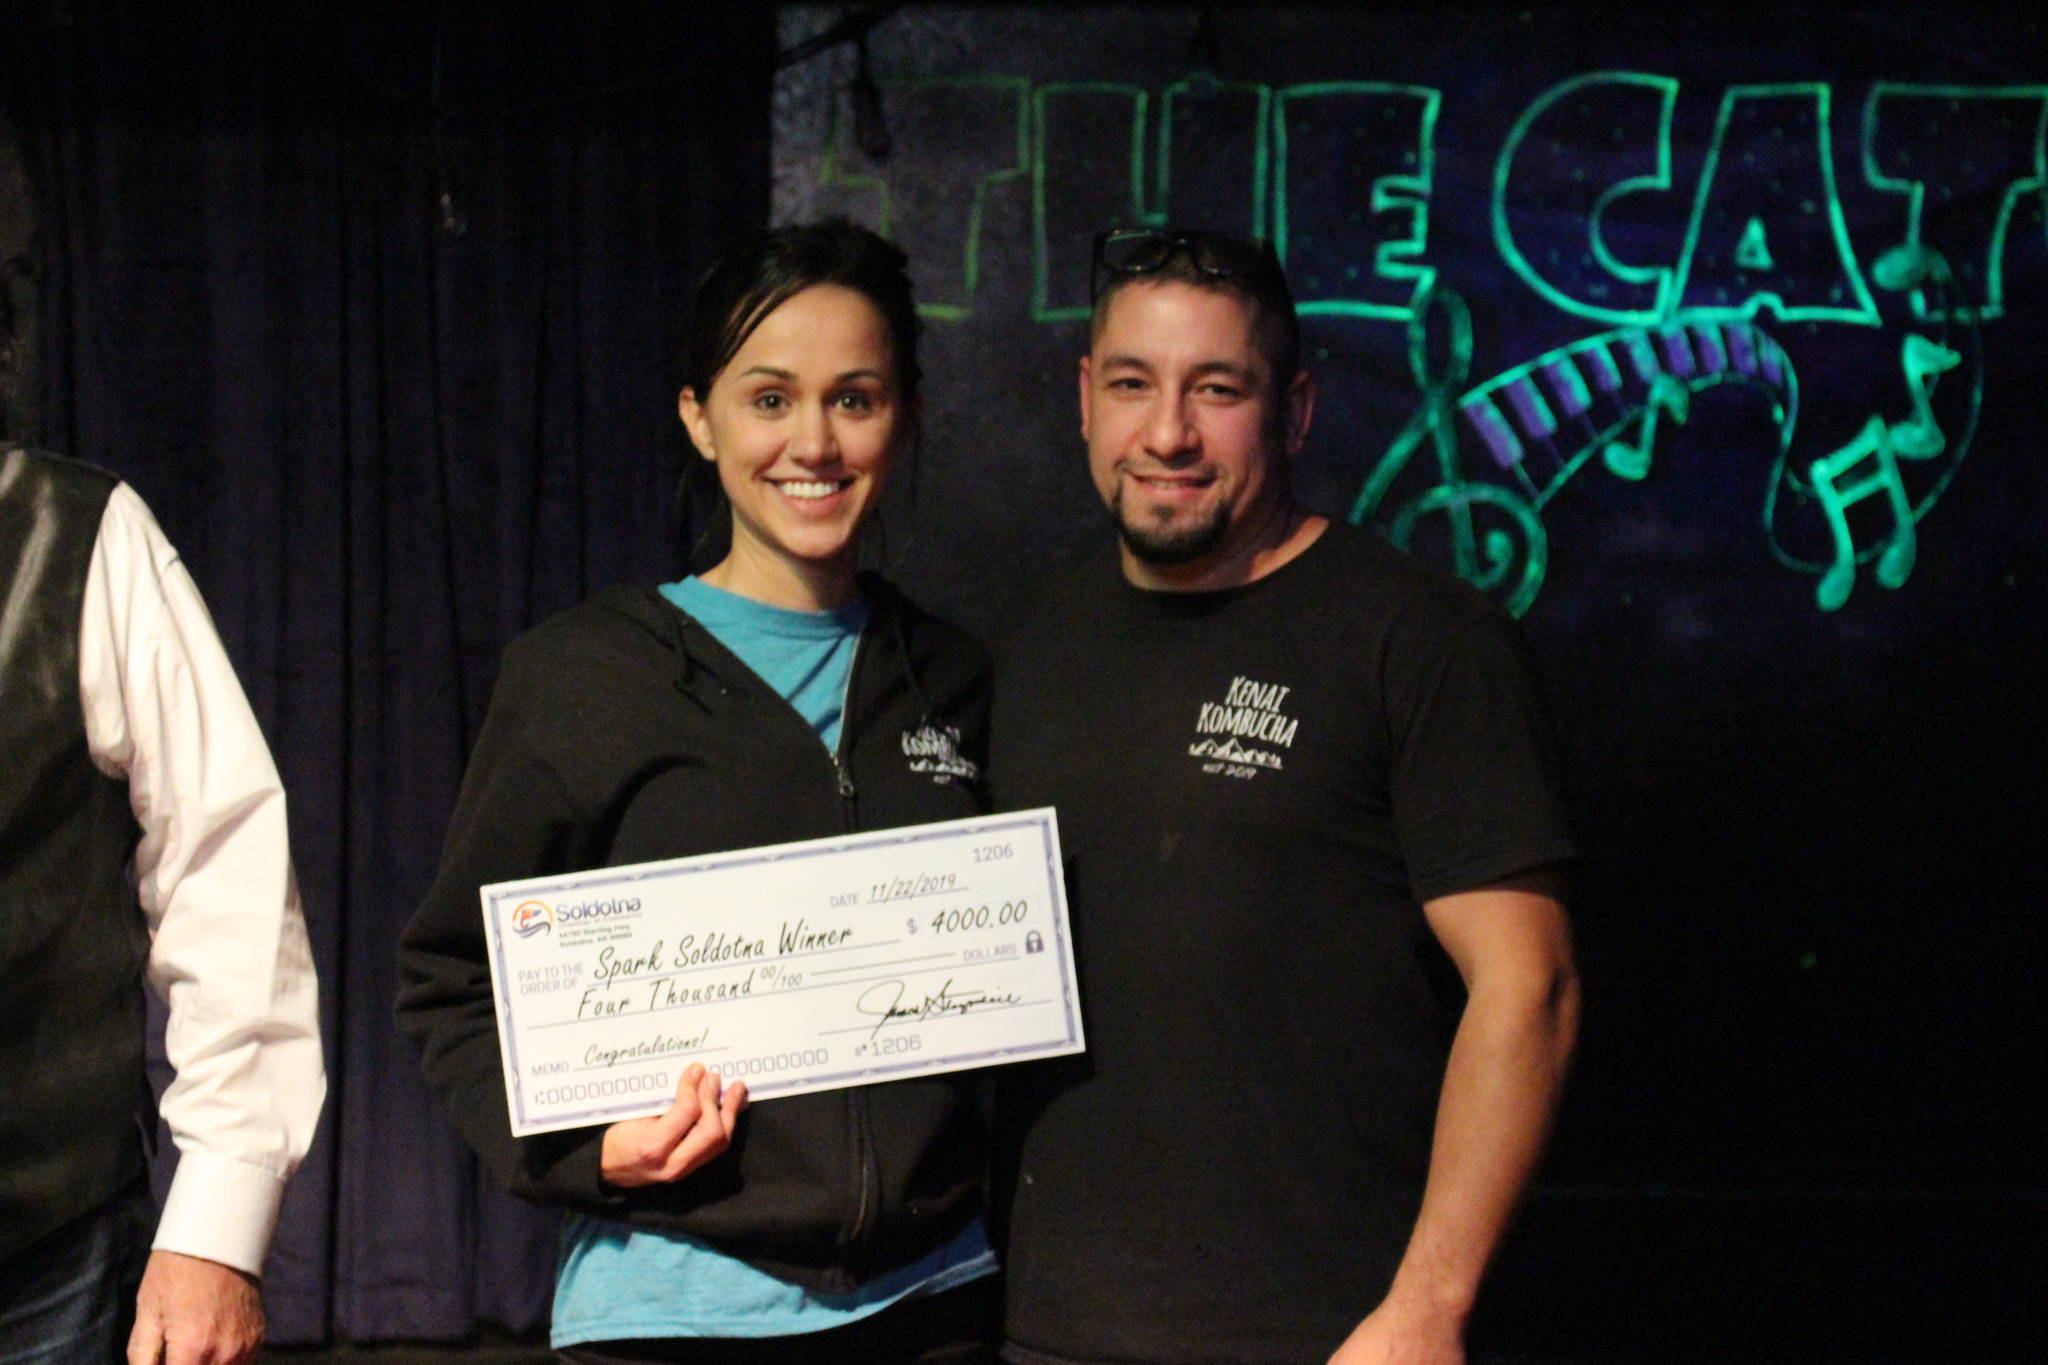 Devon and Brian Gonzalez smile with their check for $4000 after being declared the winners of the Spark Soldotna competition at the Catch Restaurant in Soldotna, Alaska, on Friday, Nov. 22, 2019. (Photo by Brian Mazurek/Peninsula Clarion)